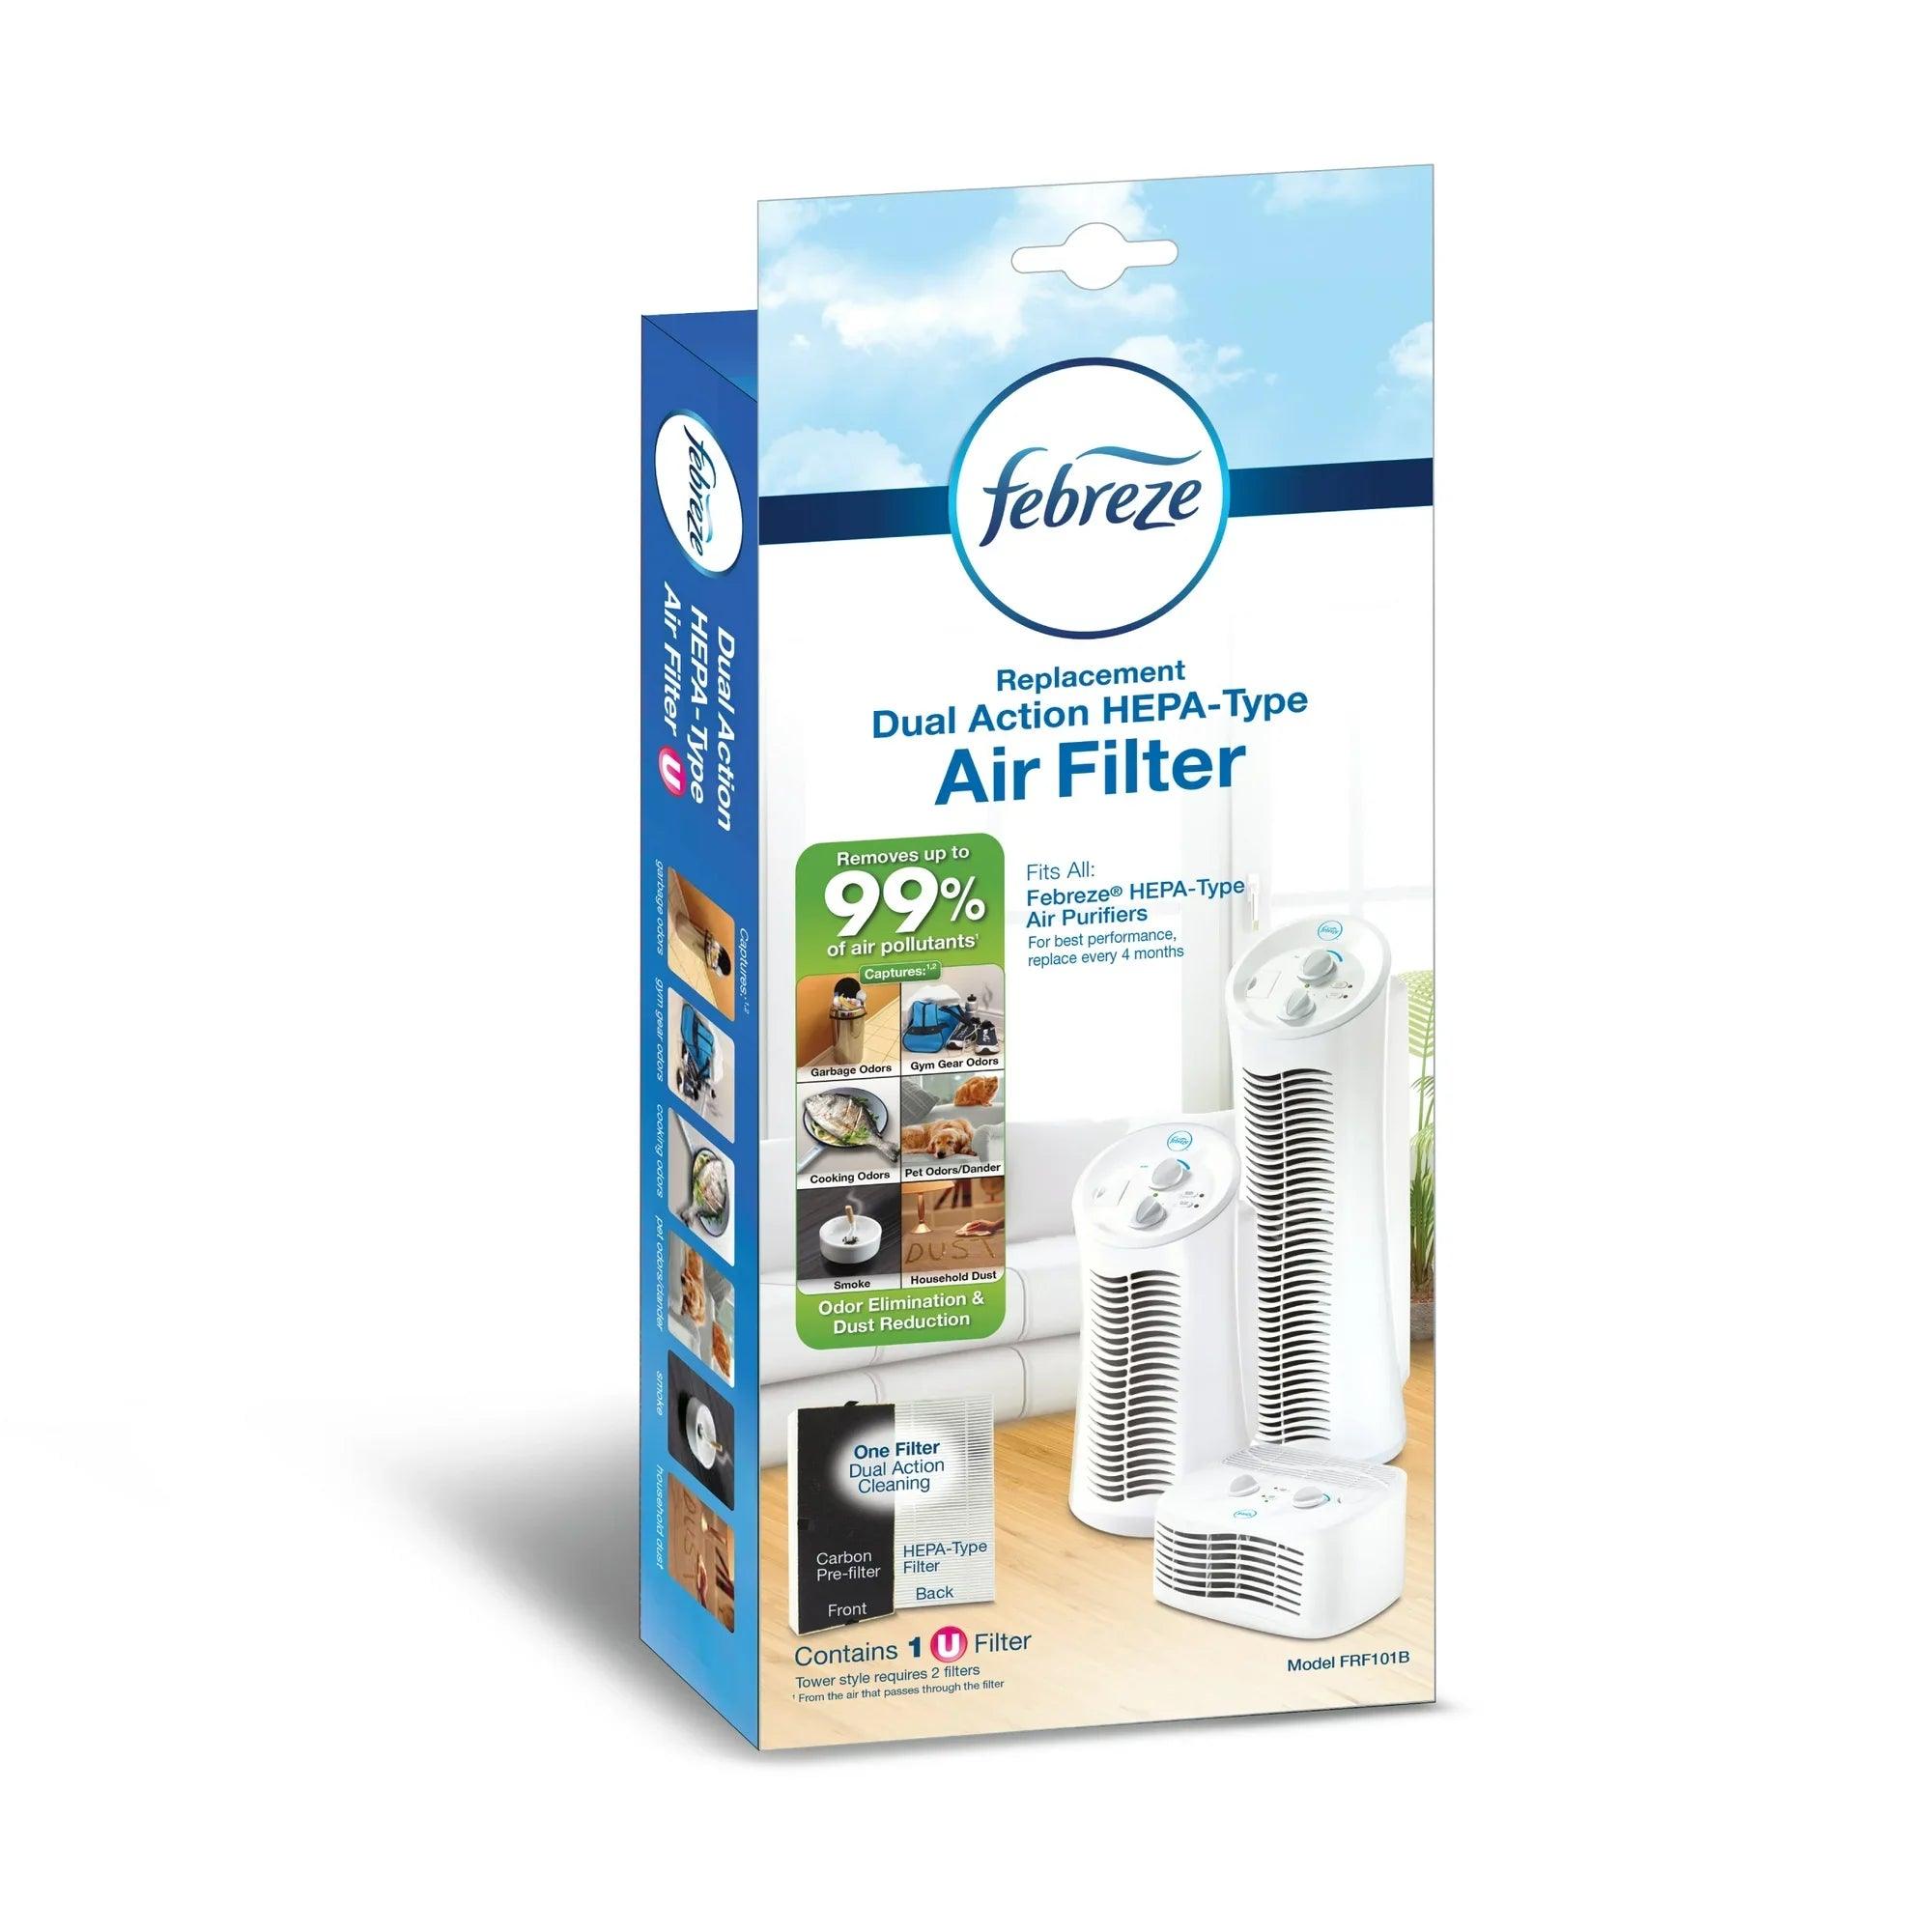 Wholesale prices with free shipping all over United States Febreze Dual Action HEPA-Type Filter, 4.9